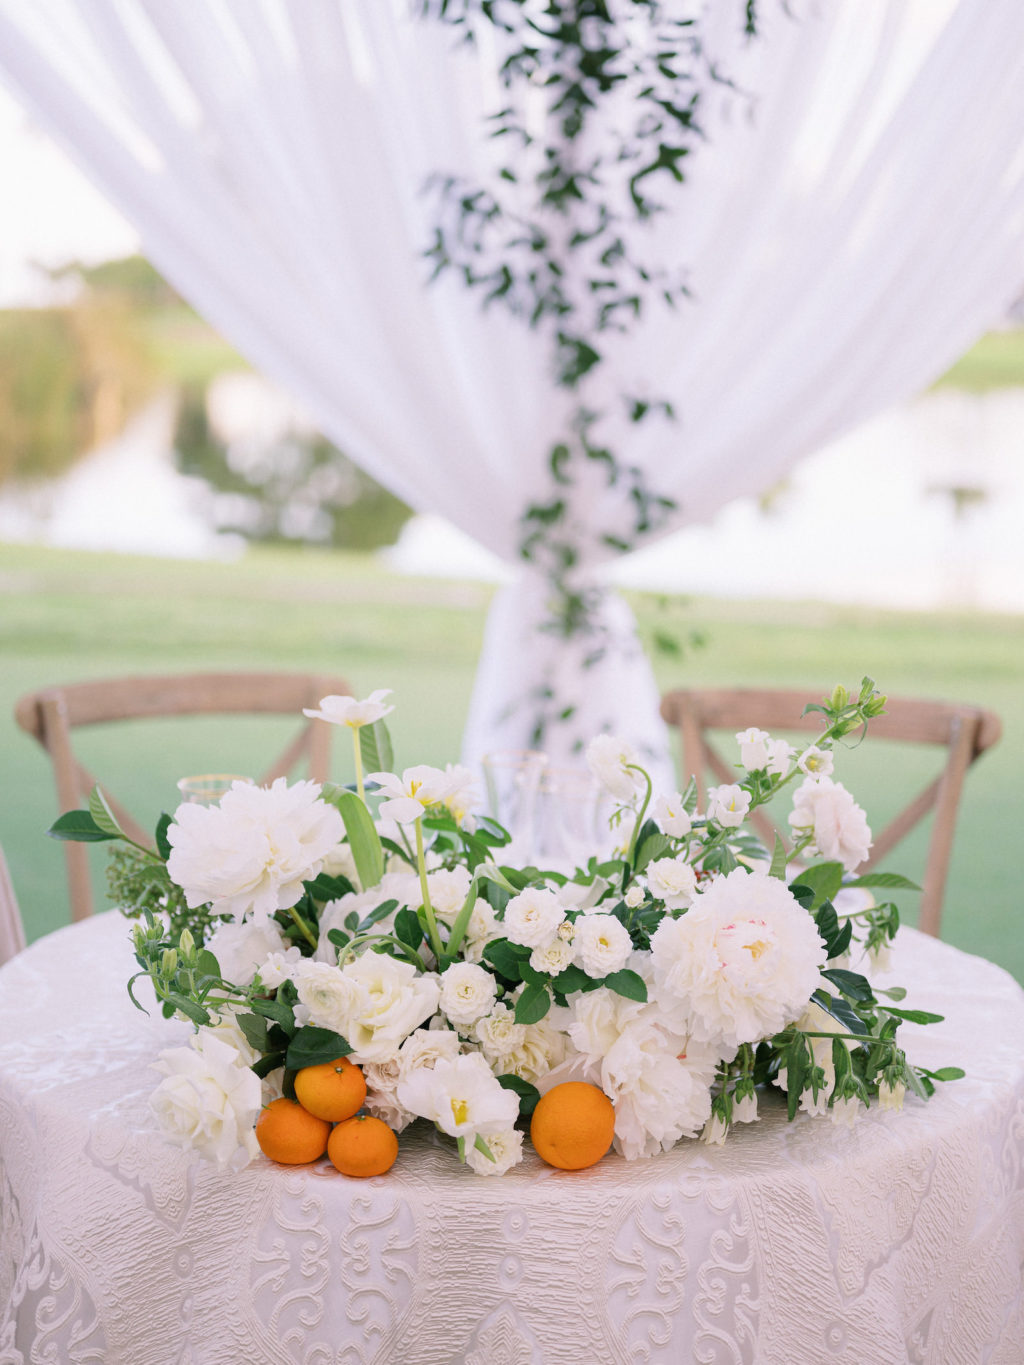 Elegant Luxurious Classic Florida Wedding Reception Decor, Table with Decorative Table Linen, Lush White Flower and Greenery Leaves Bouquet with Oranges, Wooden Cross Back Chairs